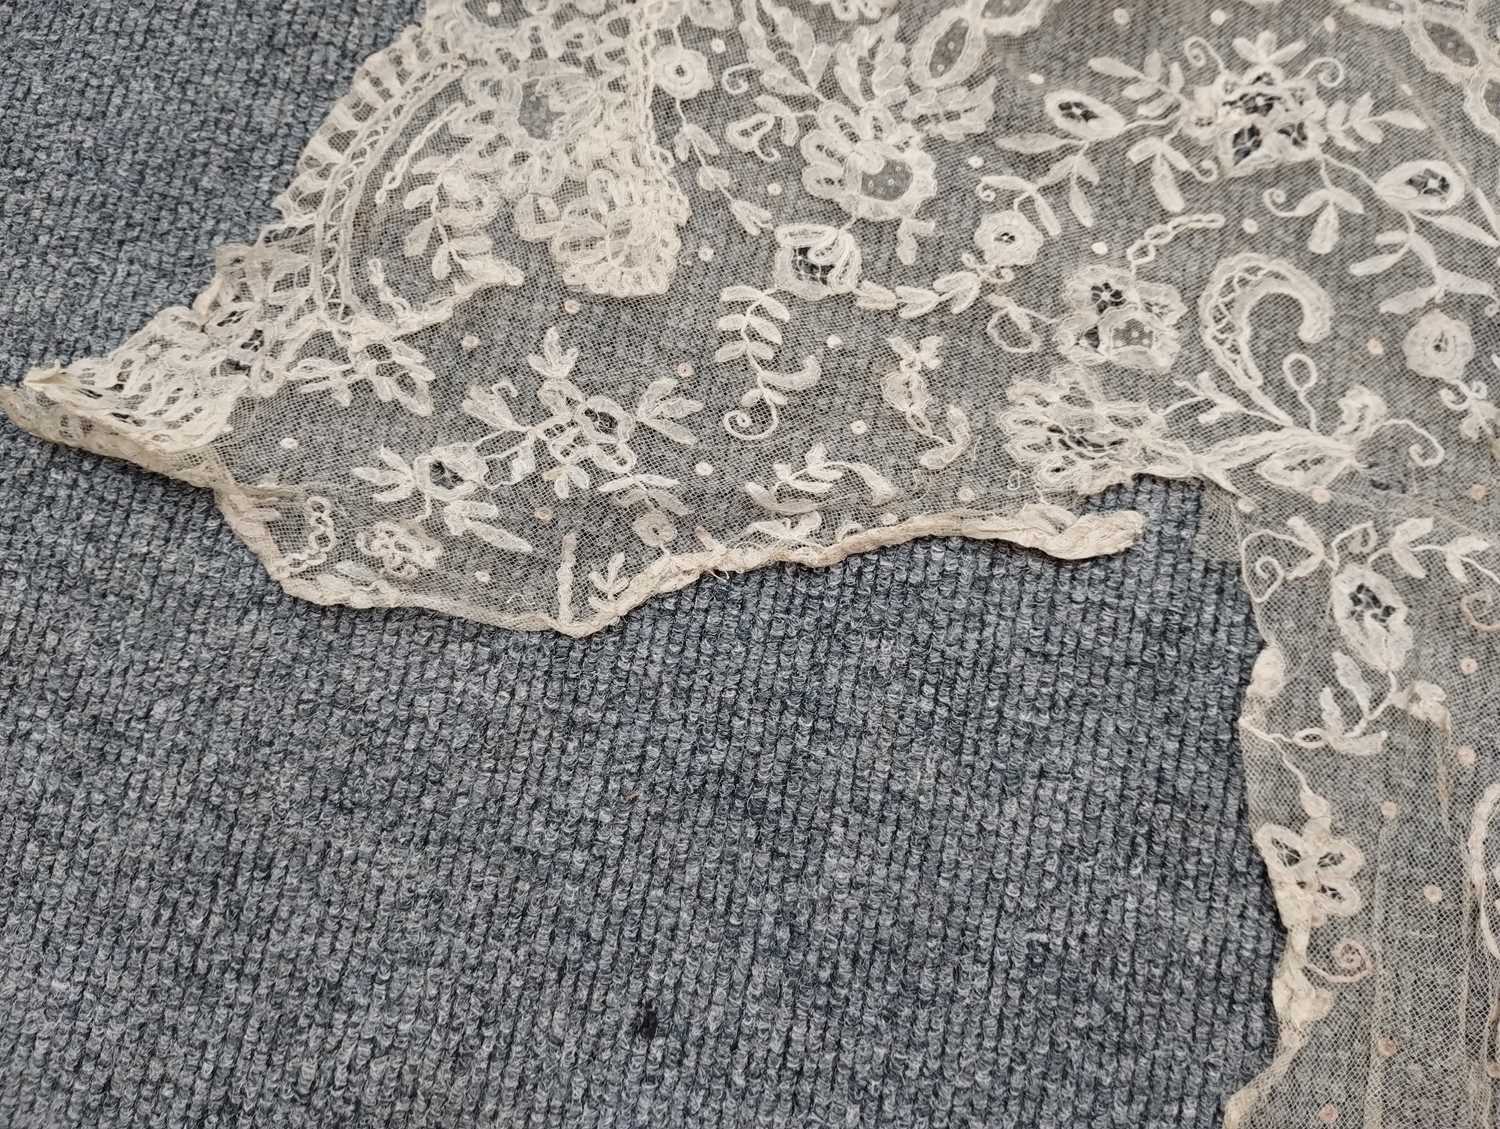 Early 20th Century Lace comprising a flounce with appliquéd flower heads and motifs within a - Image 31 of 32